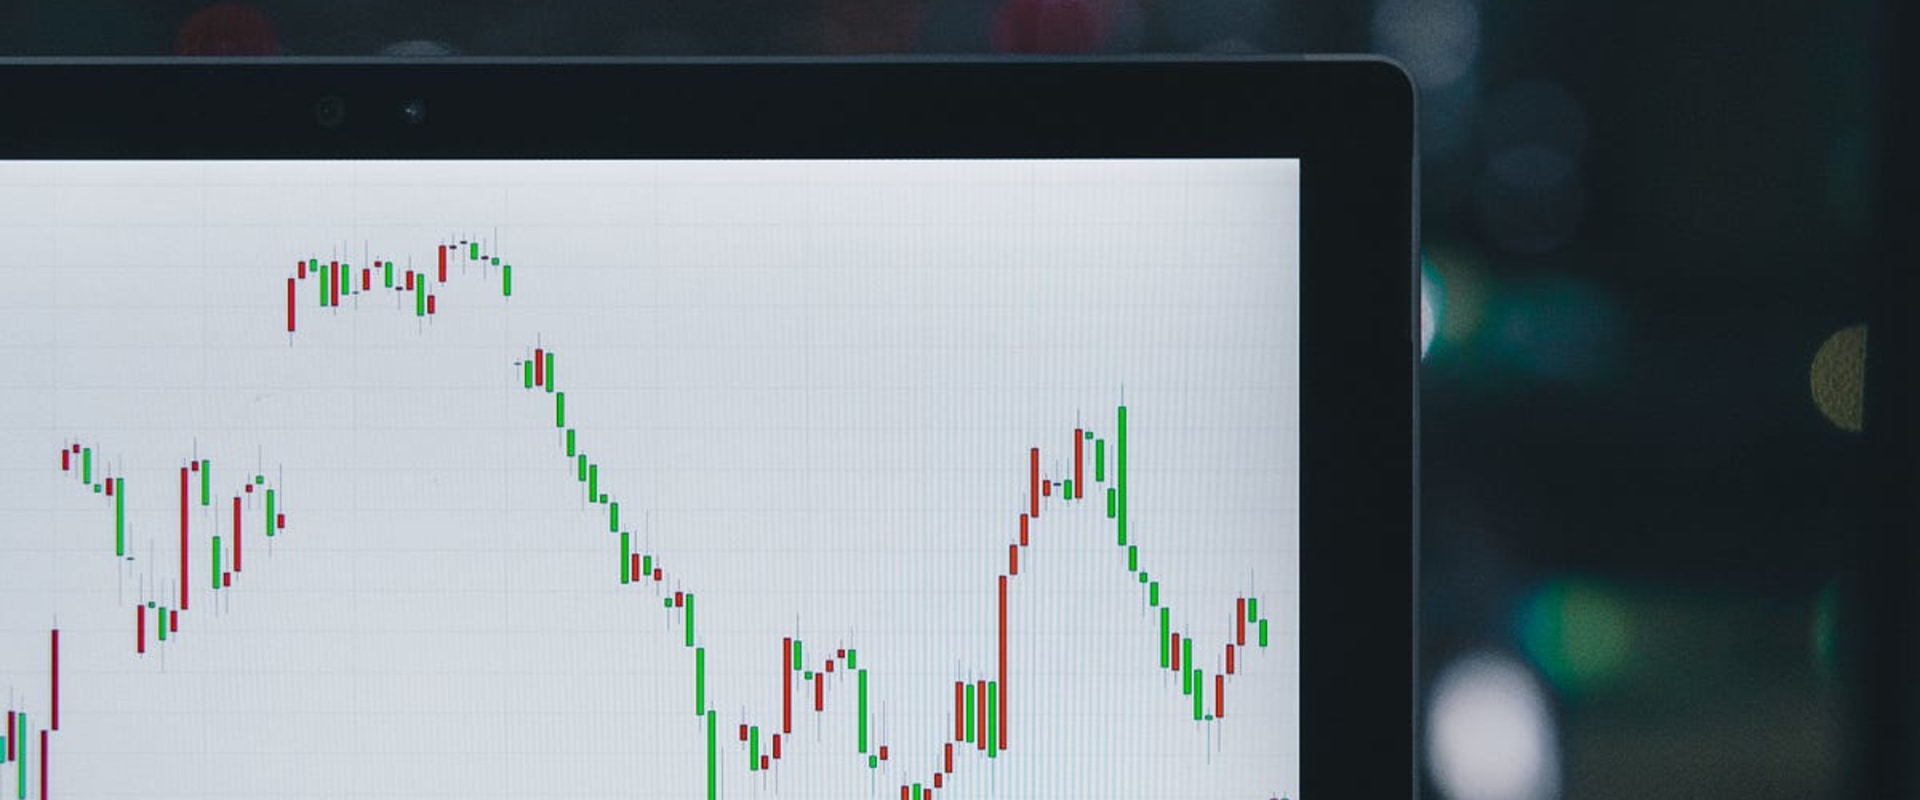 Stop Loss Orders and Forex Trading: Risk Management Tips